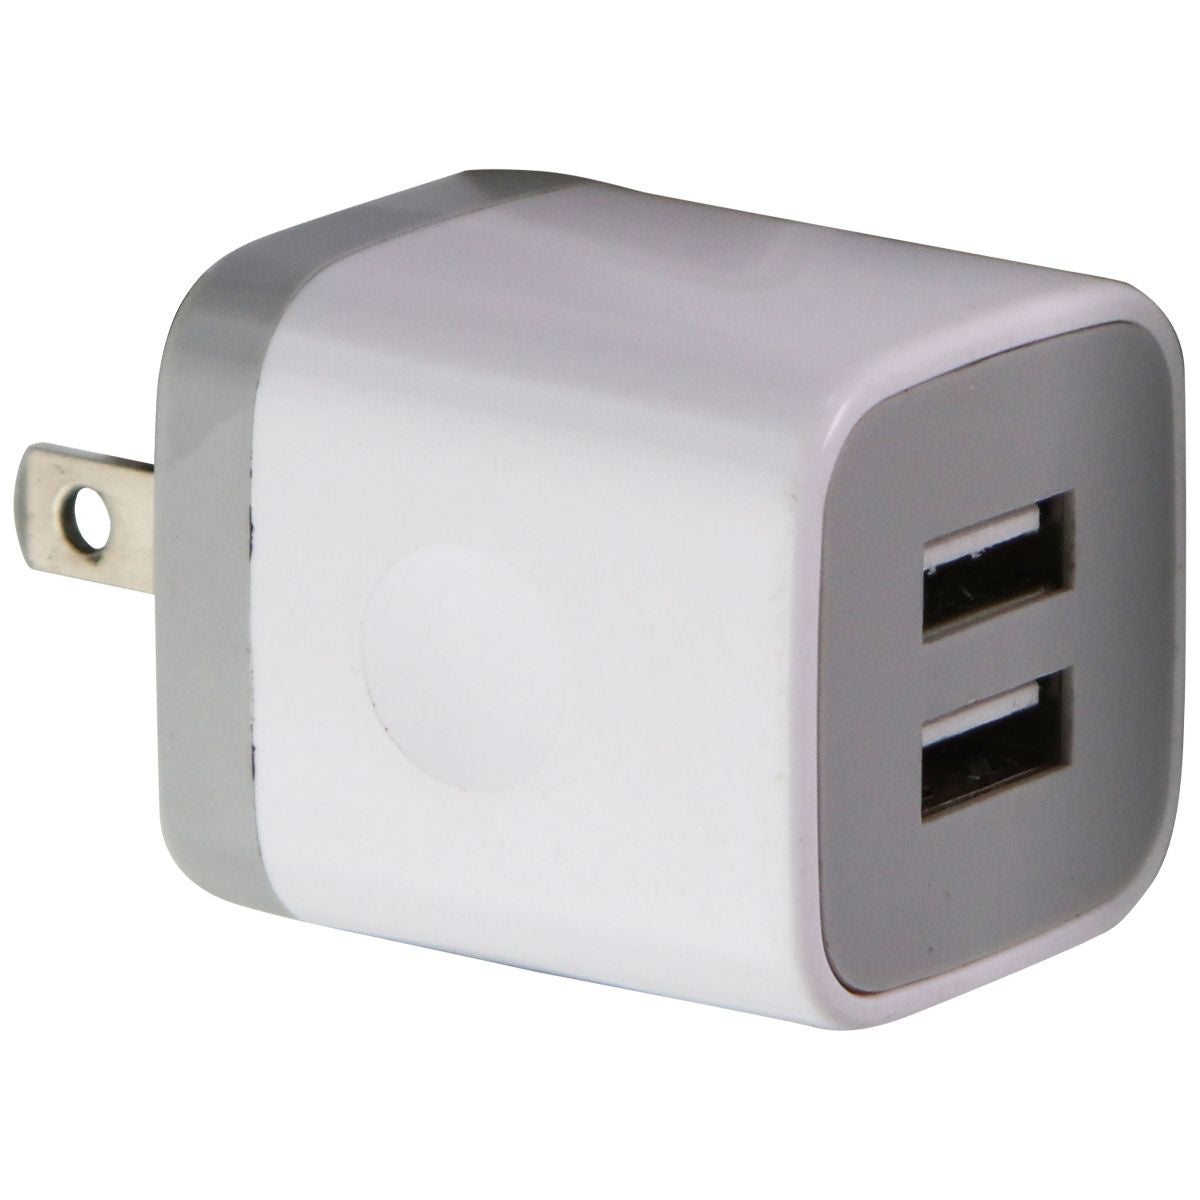 Universal (5V/2.1A) Dual USB Wall Charger Travel Adapter - White/Gray (US2018)